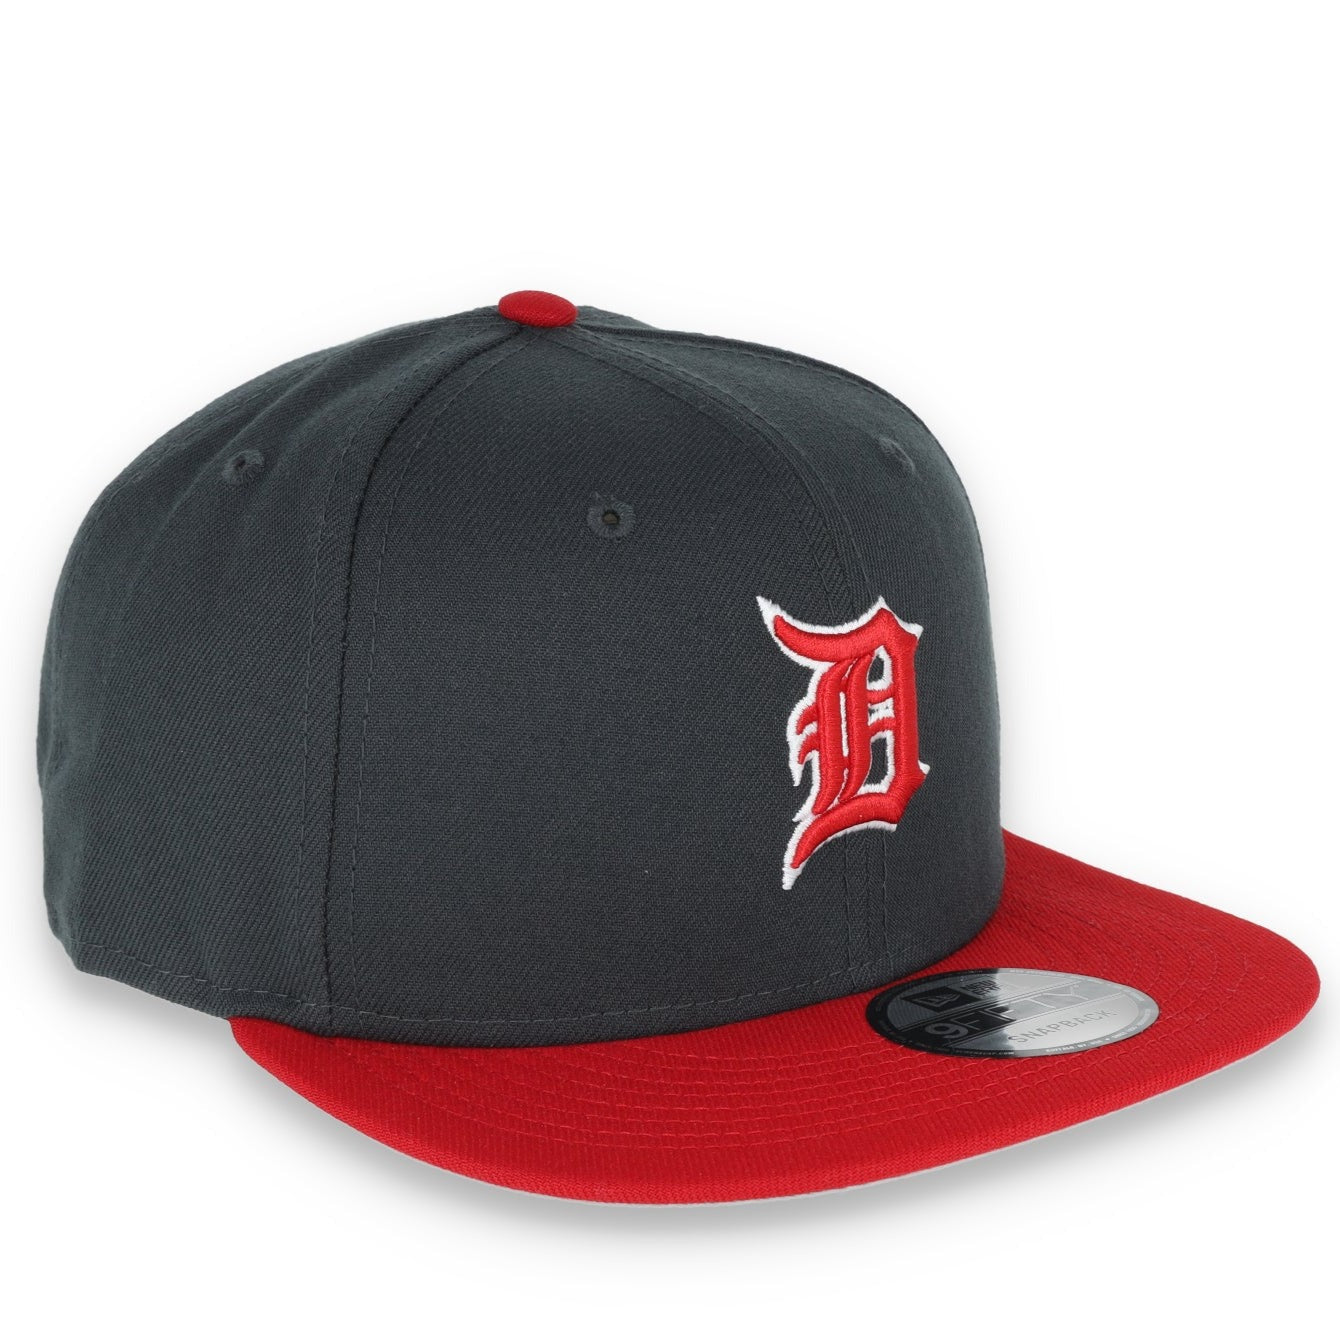 New Era Detroit Tigers 2-Tone Color Pack 9FIFTY Snapback Hat- Grey/Scarlet